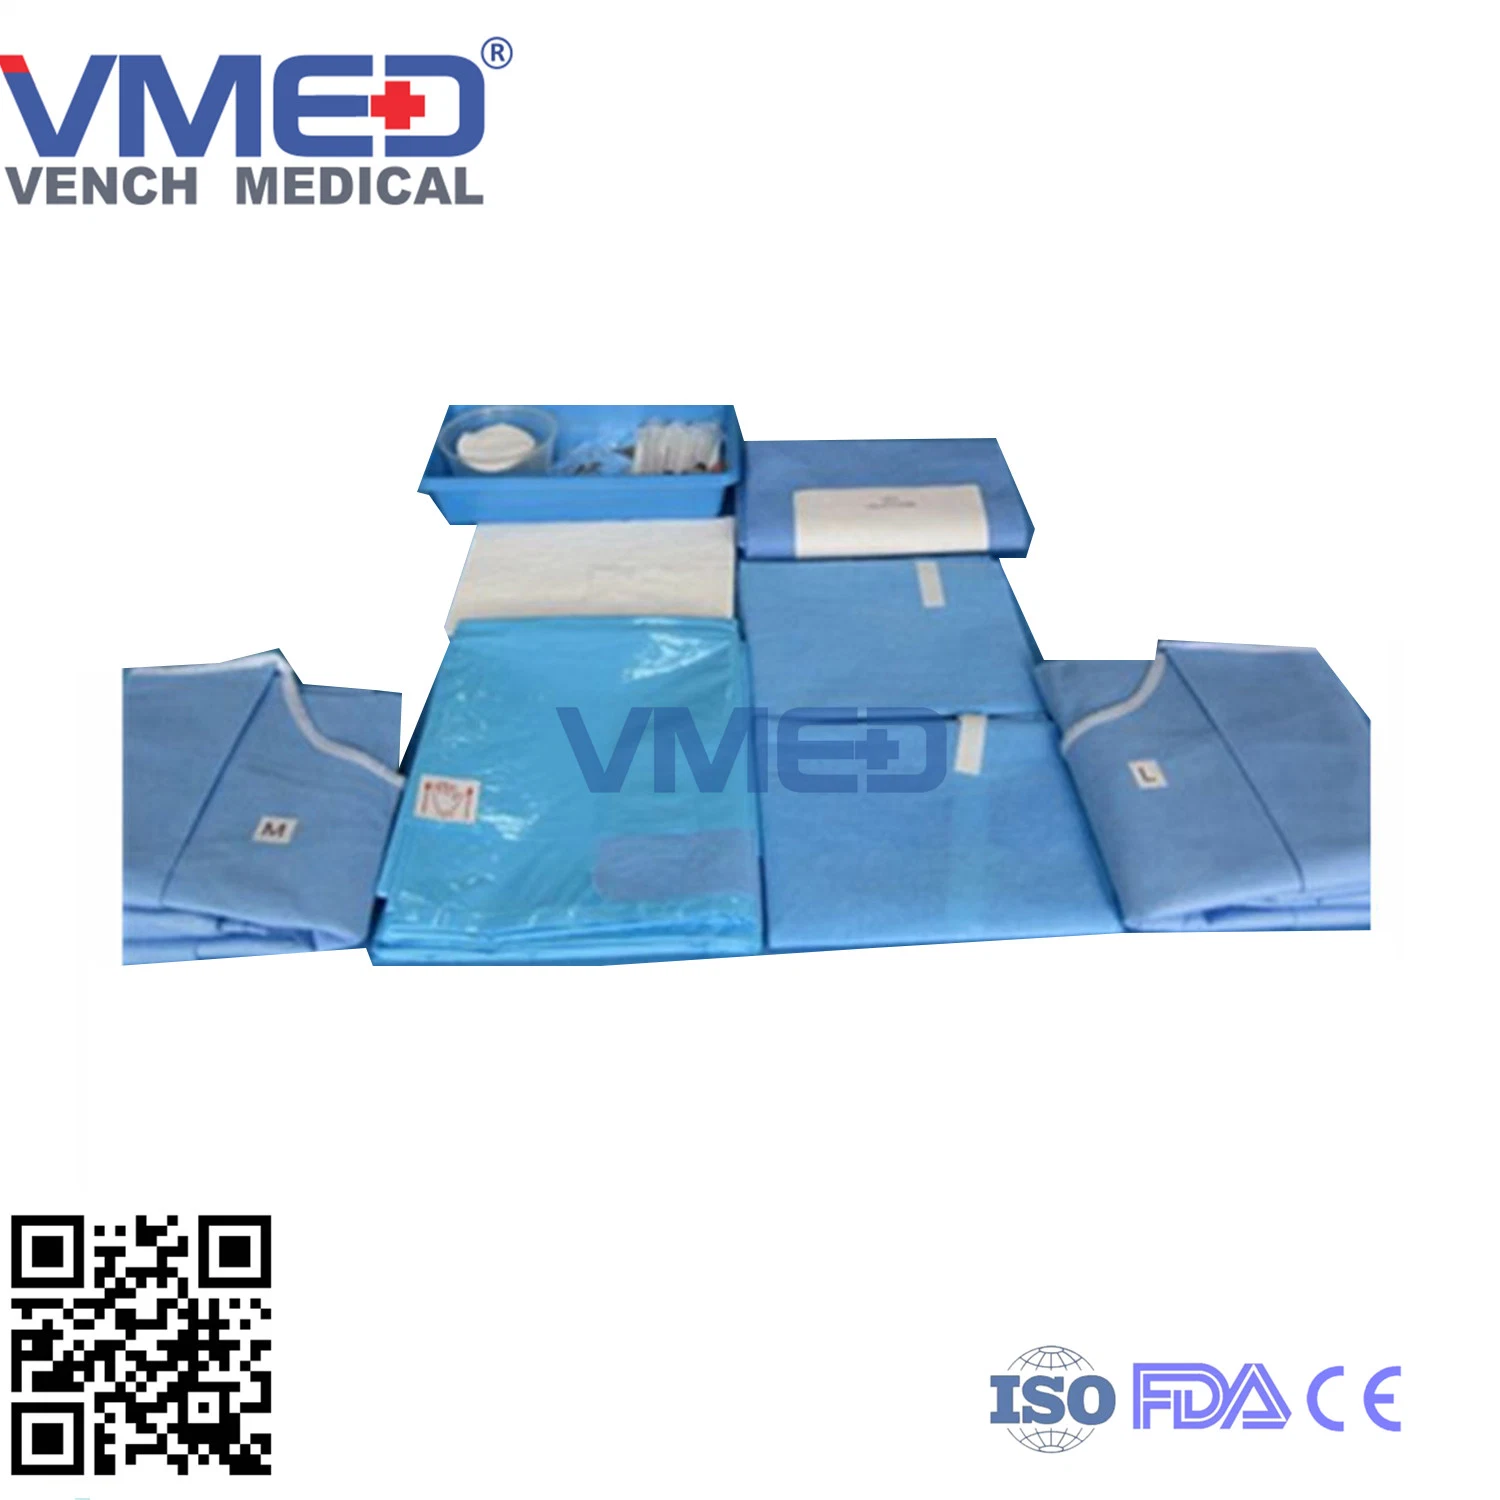 Disposable Surgical Gynecology Delivery Drape Pack for Medical Use with Ce and ISO Approval China Manufacturer with Top Quality Urology & Gynecology Packs